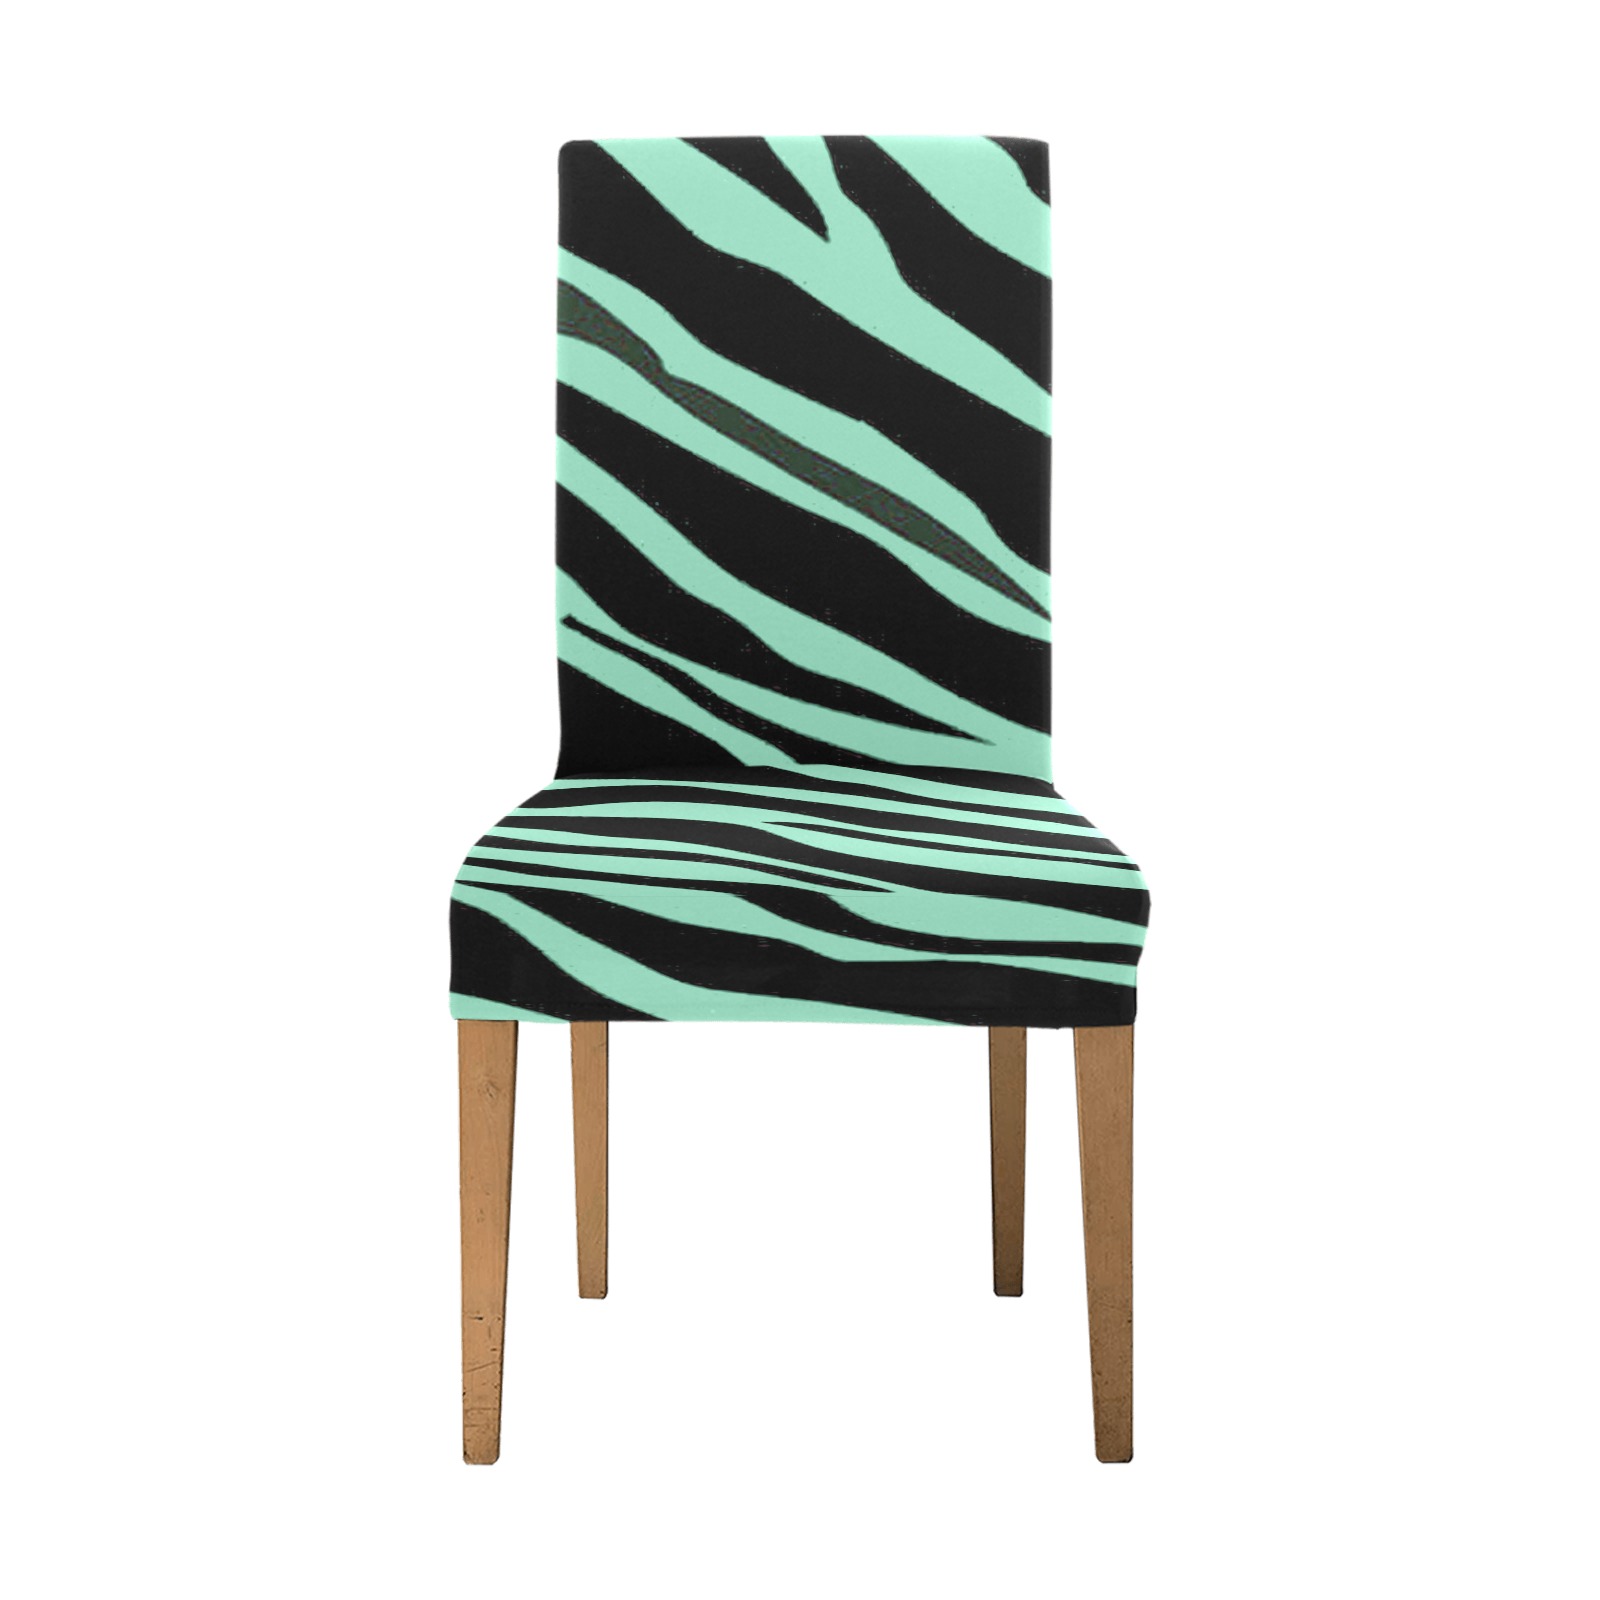 Mint Green Zebra Stripes Removable Dining Chair Cover